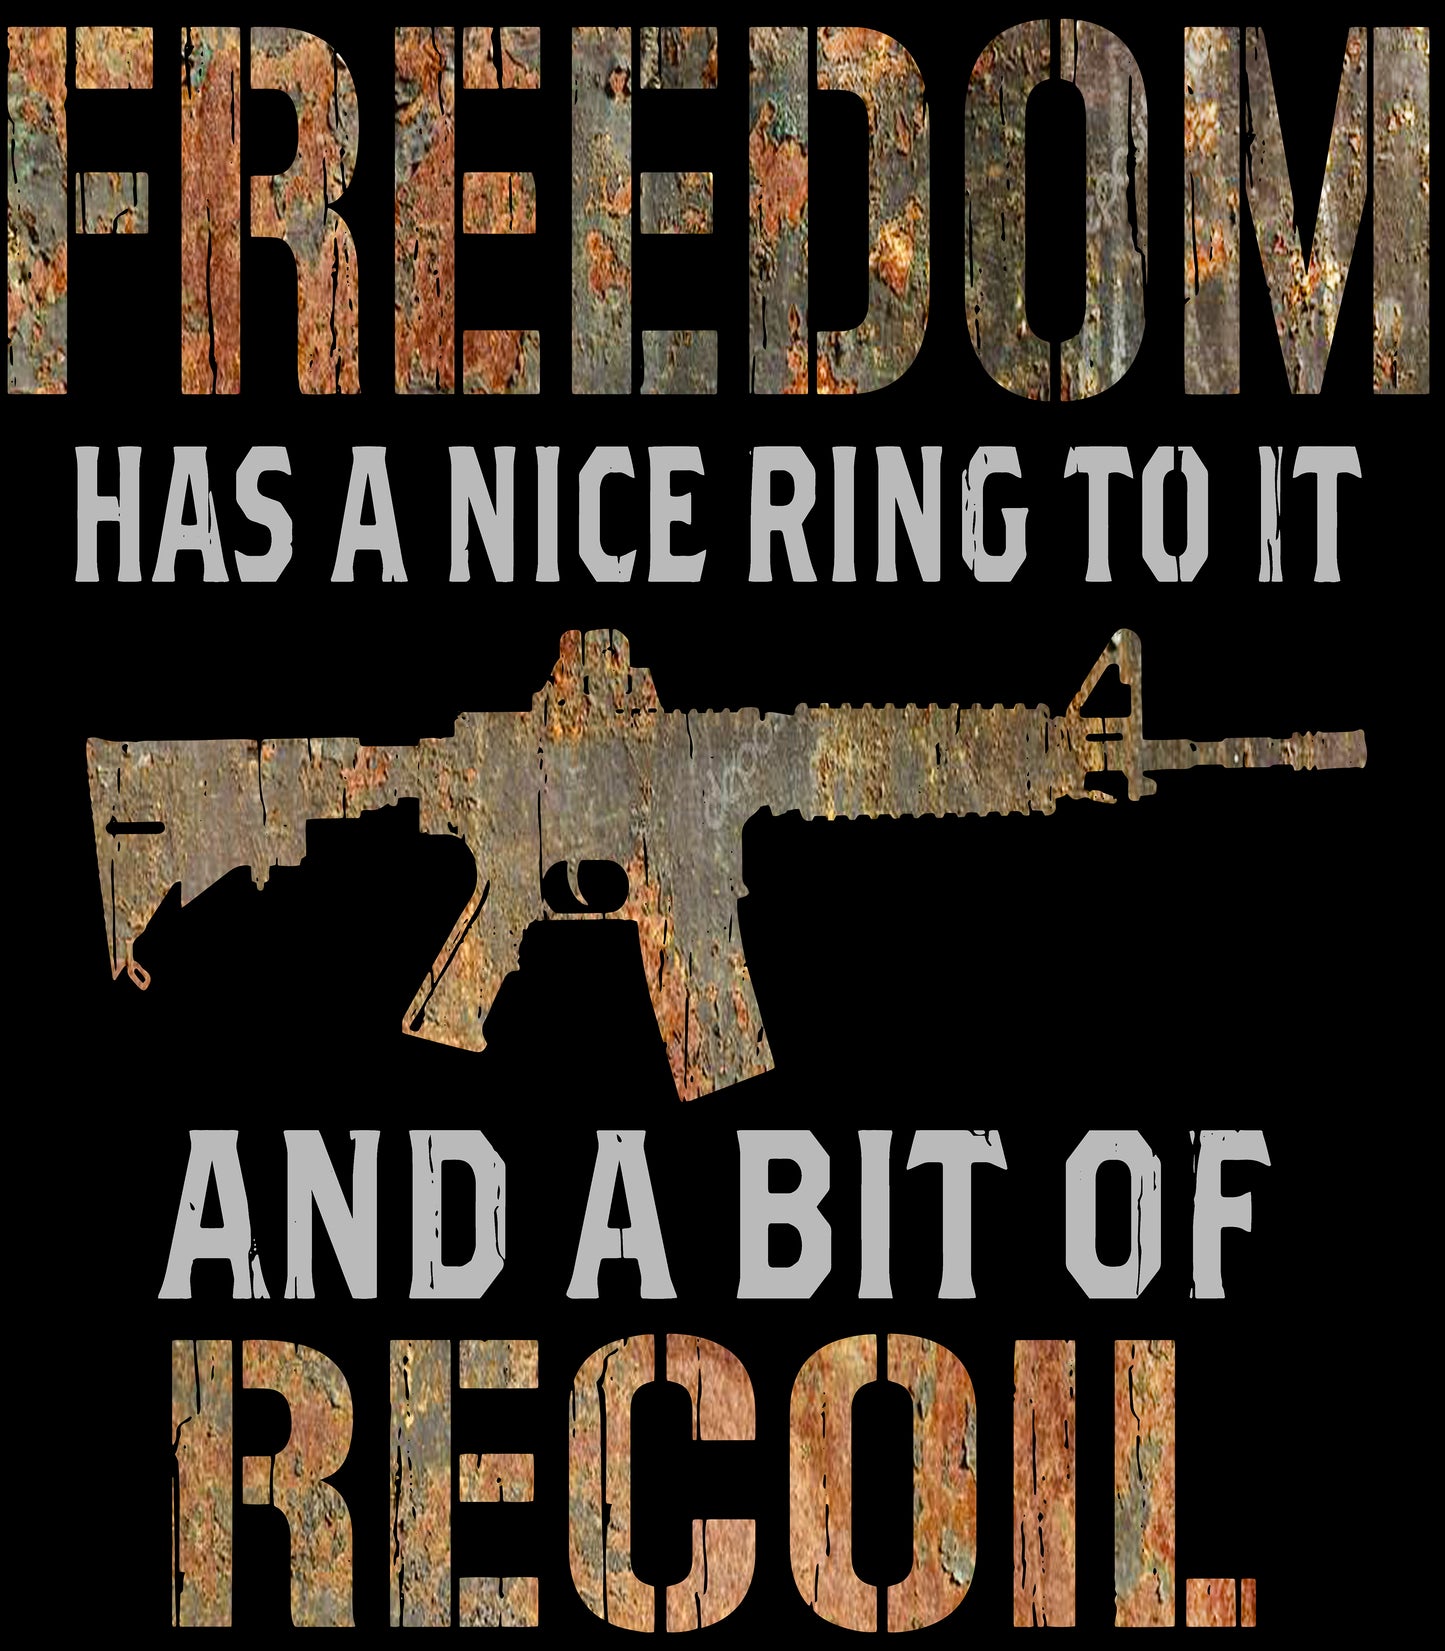 Freedom Recoil